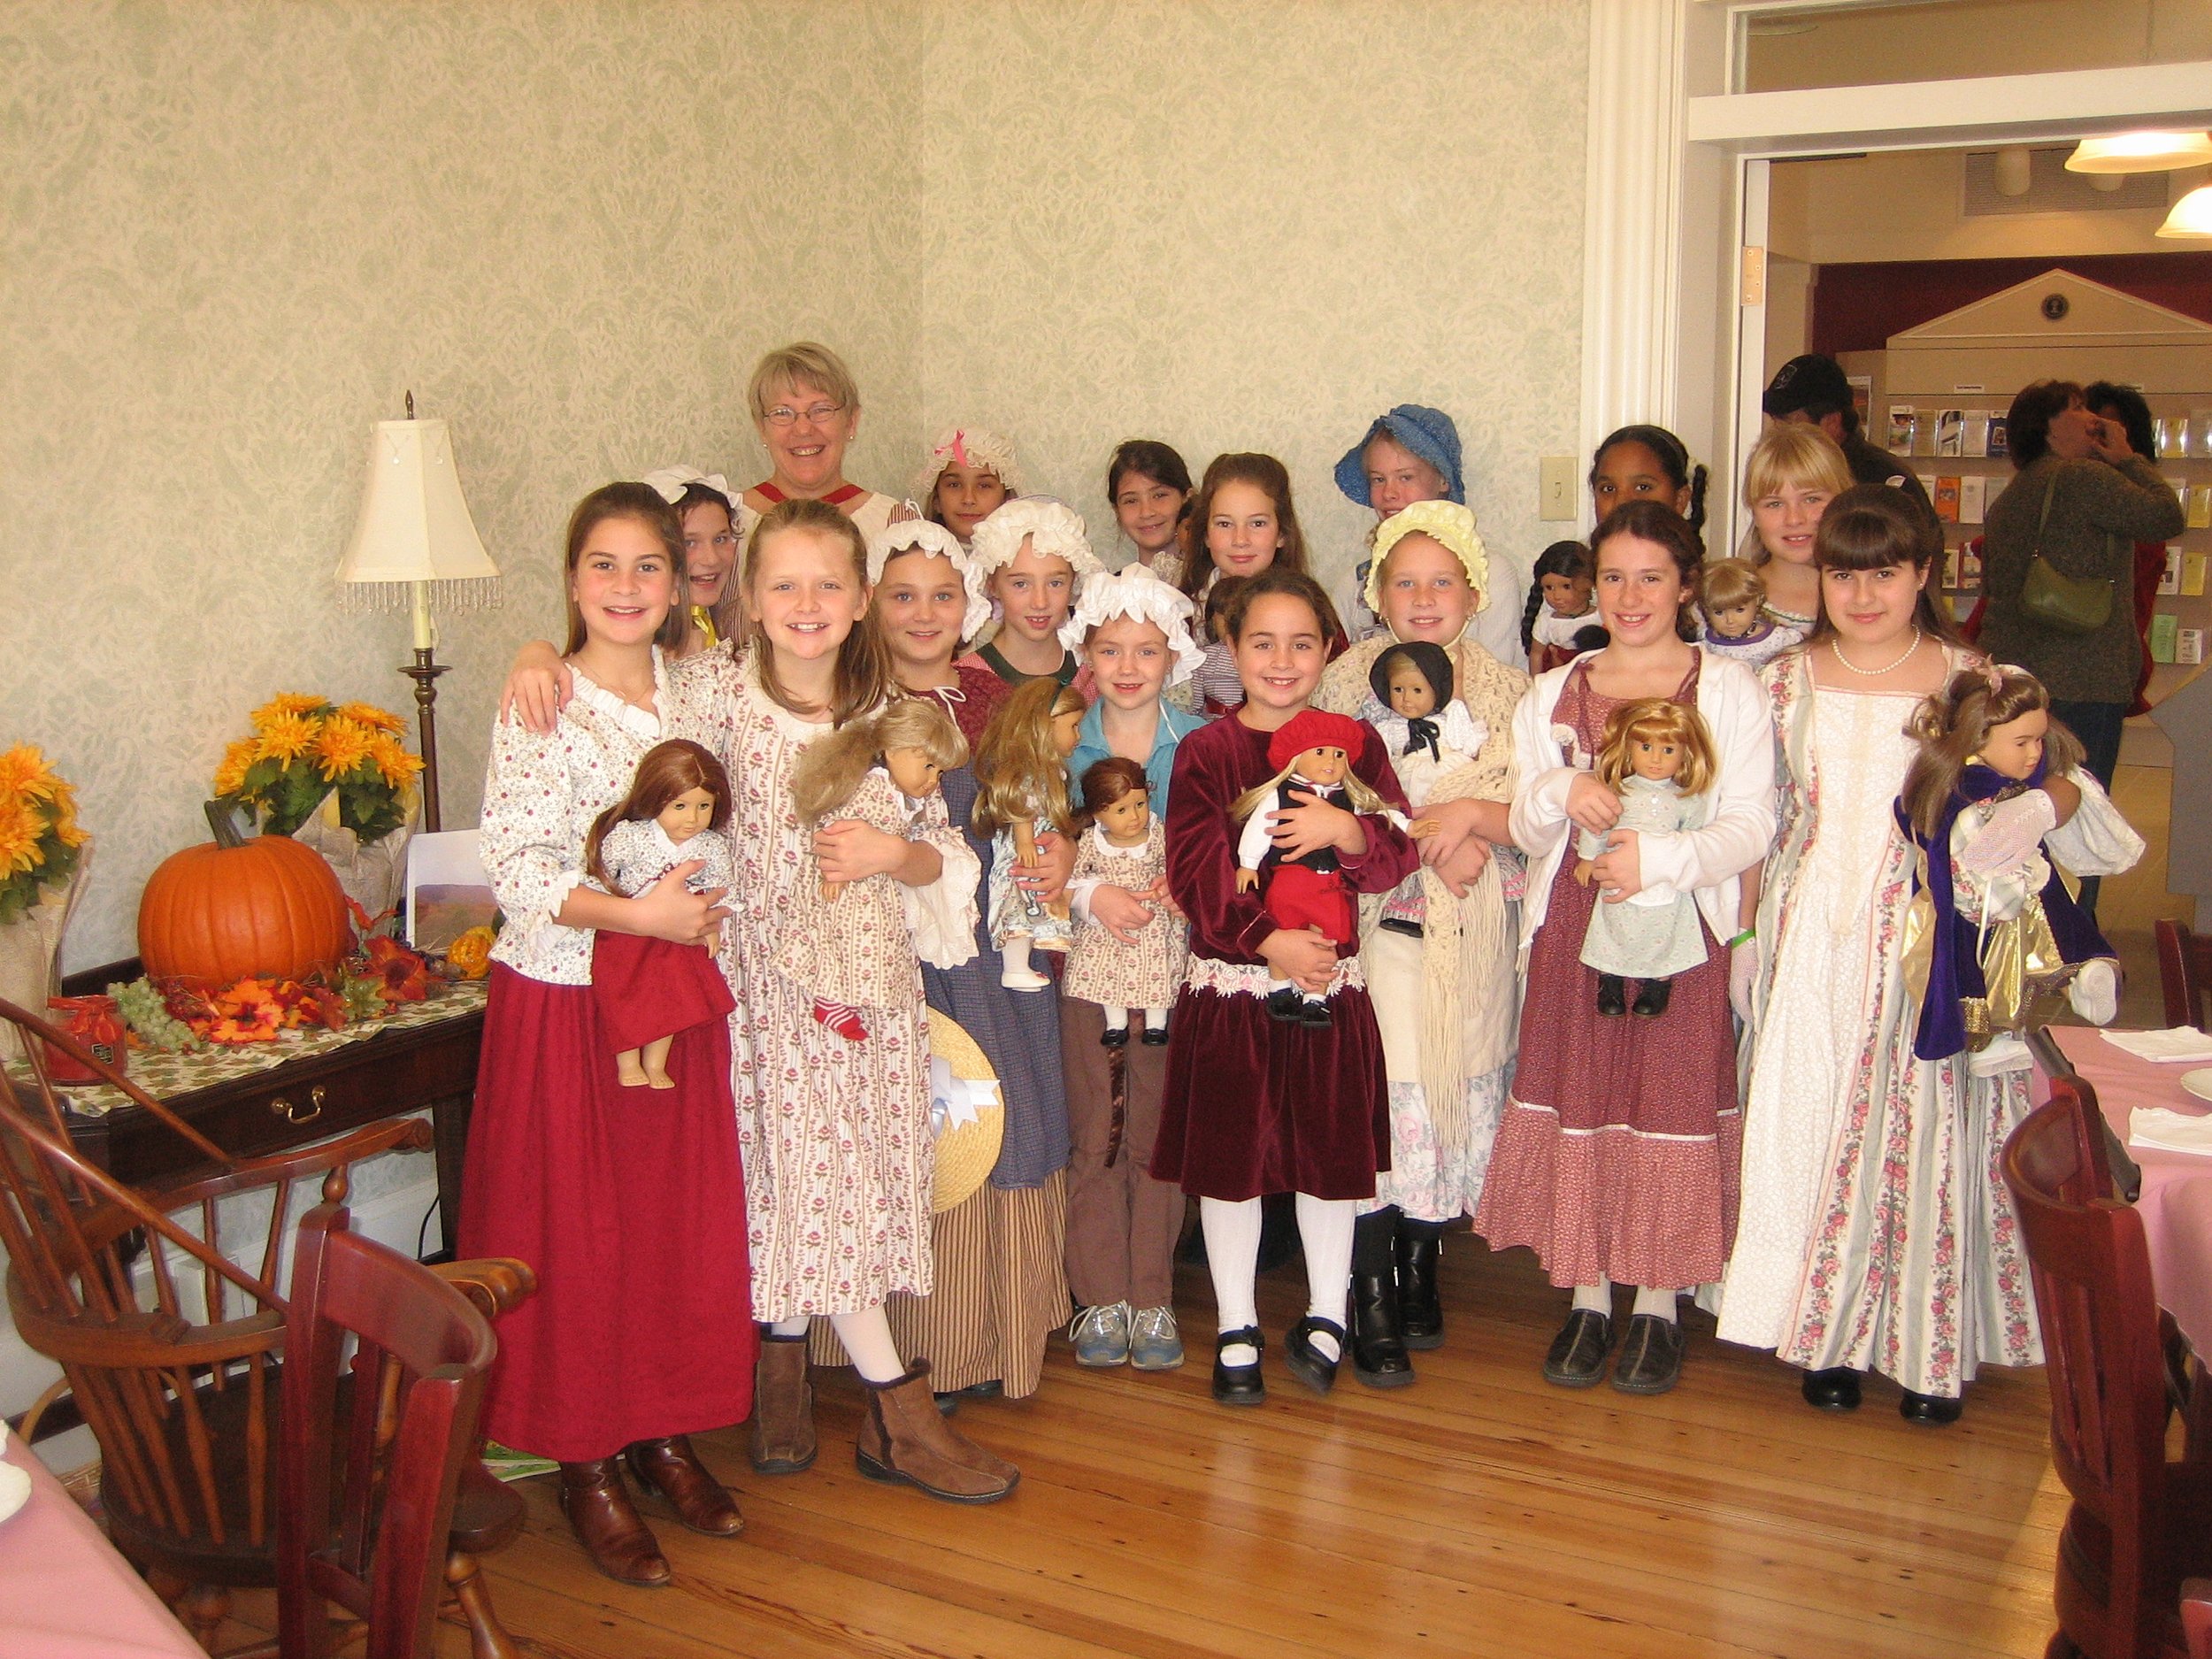  The Museum worked with many community partners to provide kids with unique experiences. We visited Mrs. Hardesty’s Team room to experience colonial times with our American Girl dolls.  